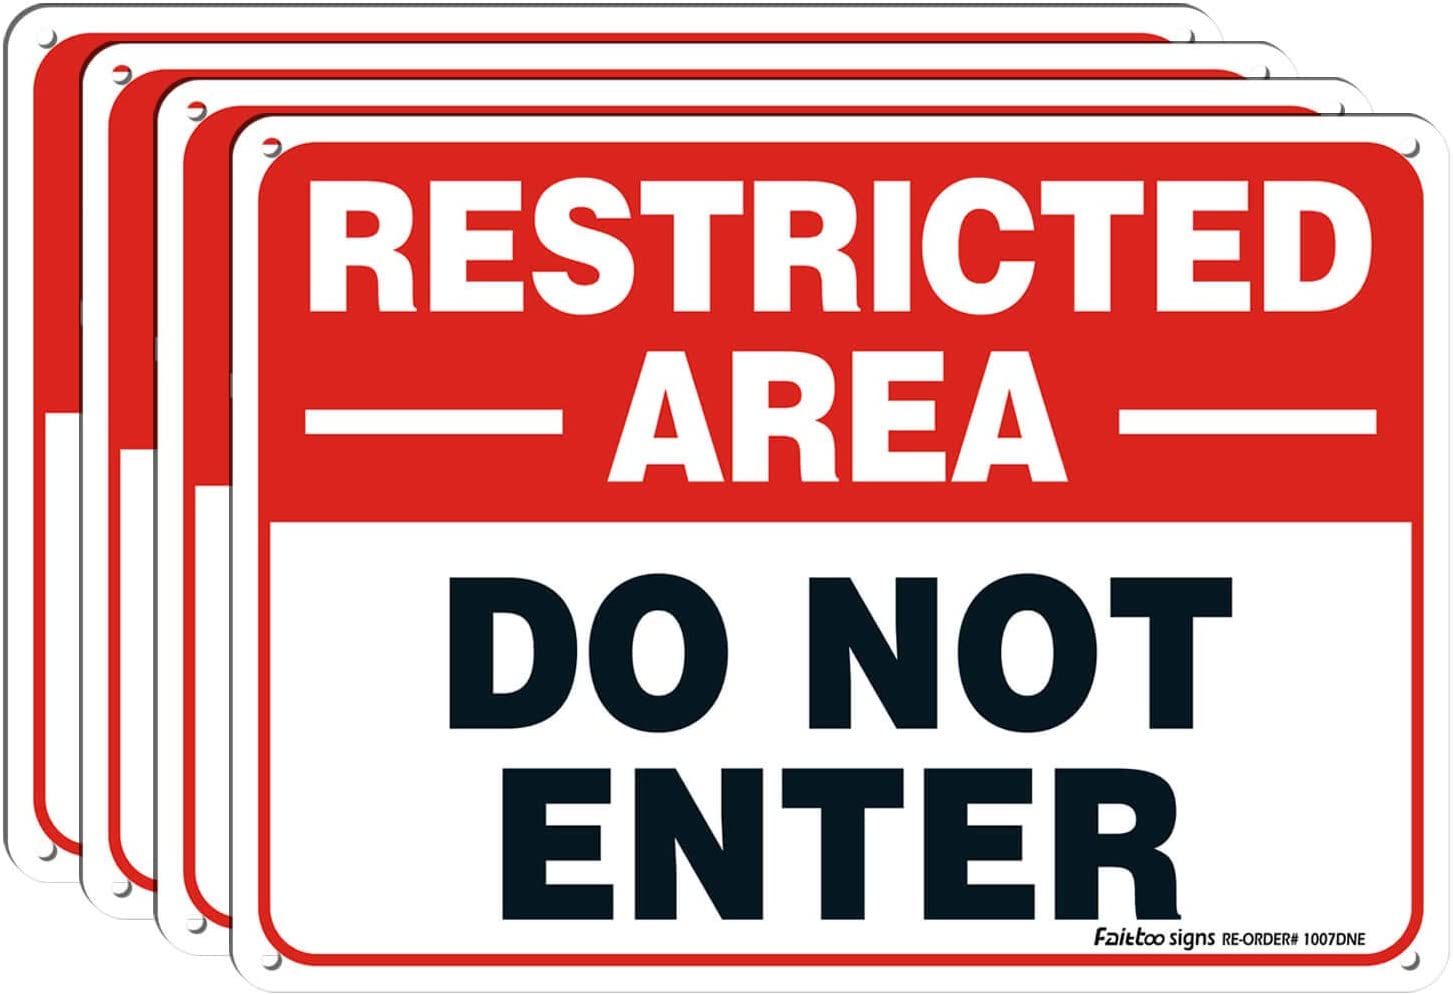 Restricted Area Sign, Do Not Enter Signs Metal, 4 Pack, 10 x 7 inch .40 Rust Free Aluminum, UV Protected, Weather Resistant, Waterproof, Durable Ink, Easy to install